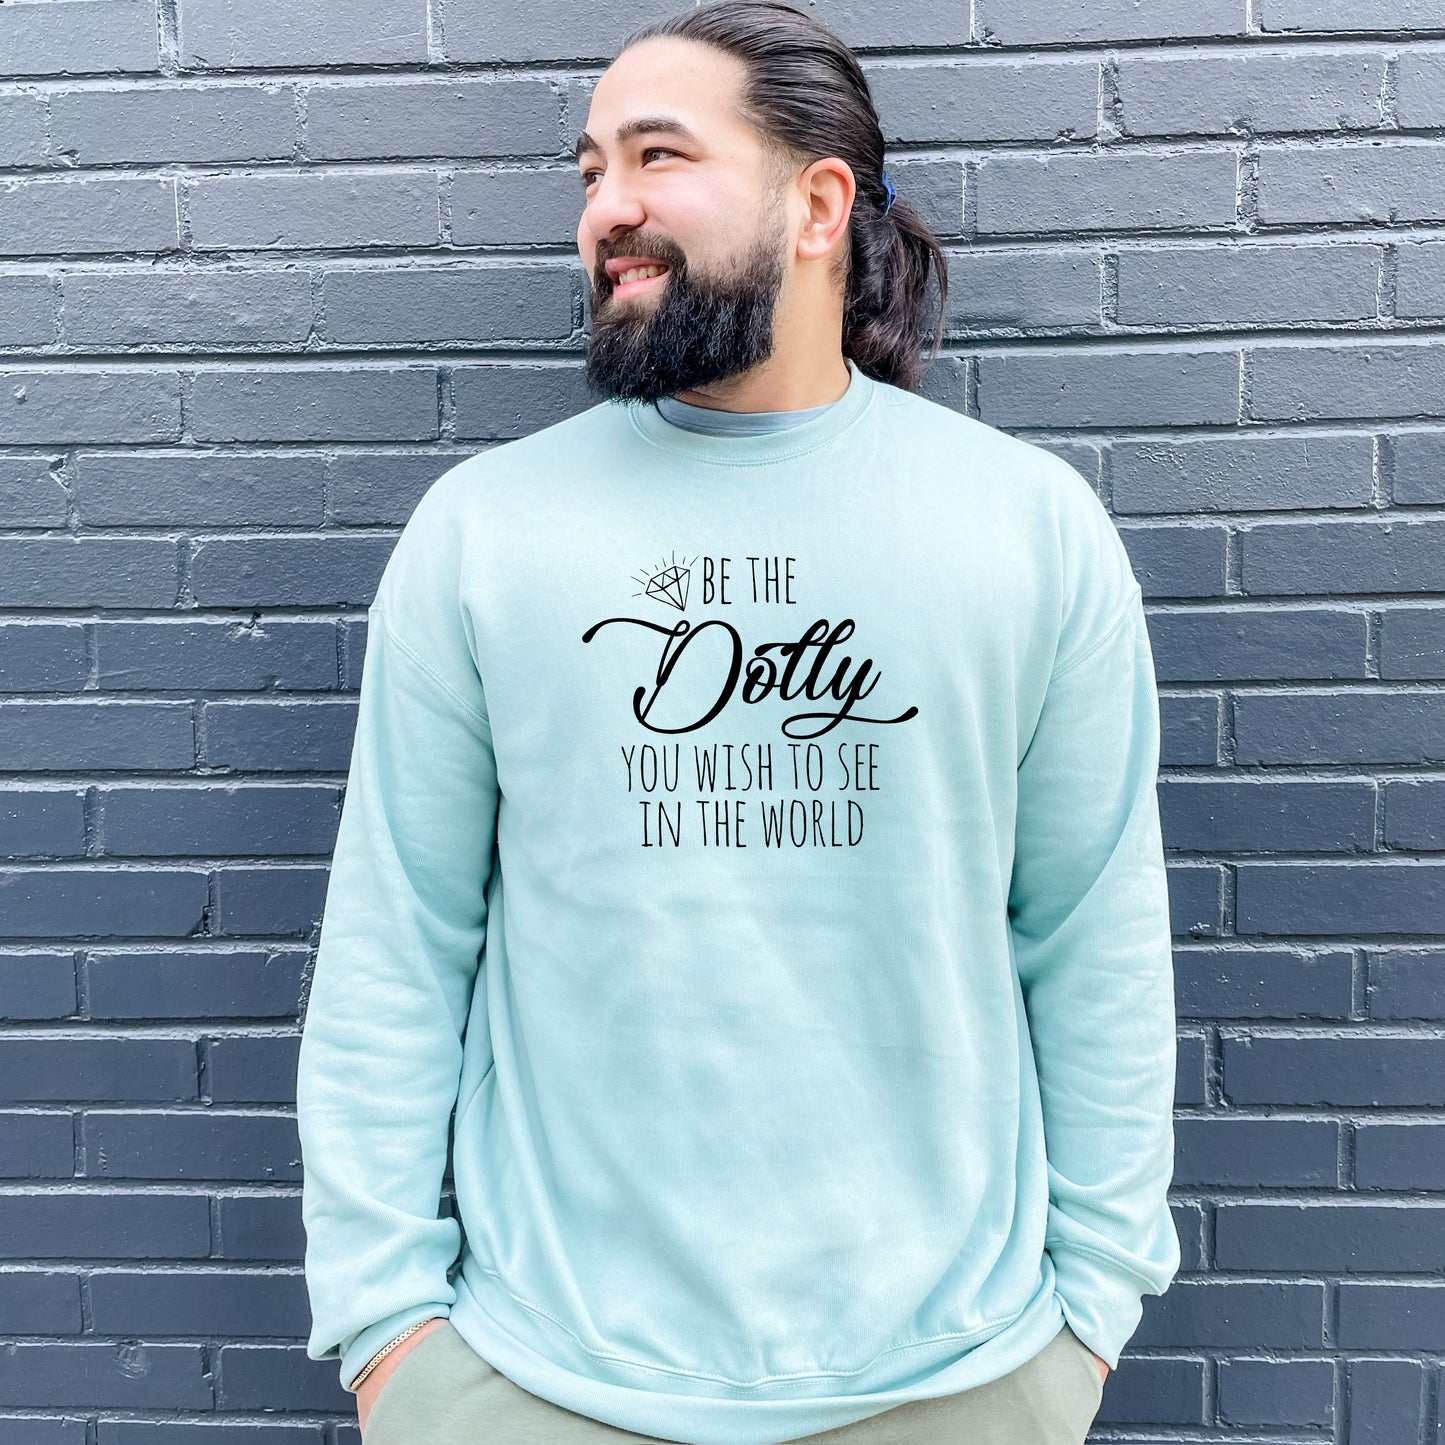 Be the Dolly You Wish to See in the World (Dolly Parton) - Unisex Sweatshirt - Heather Gray or Dusty Blue